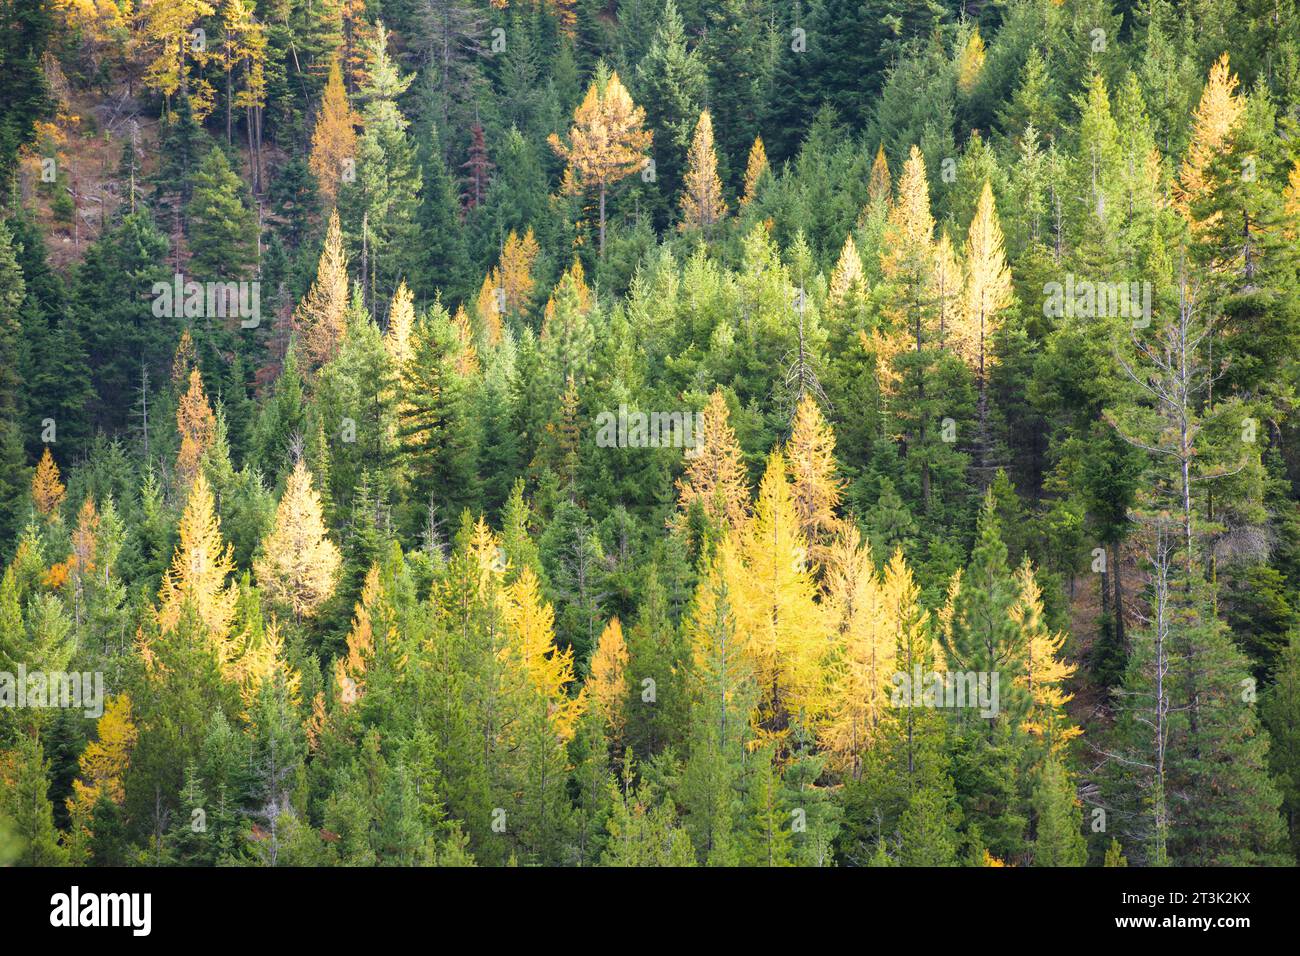 Deciduous larch trees glow yellow among green evergreen fir trees in a Cascade Mountain forest Stock Photo